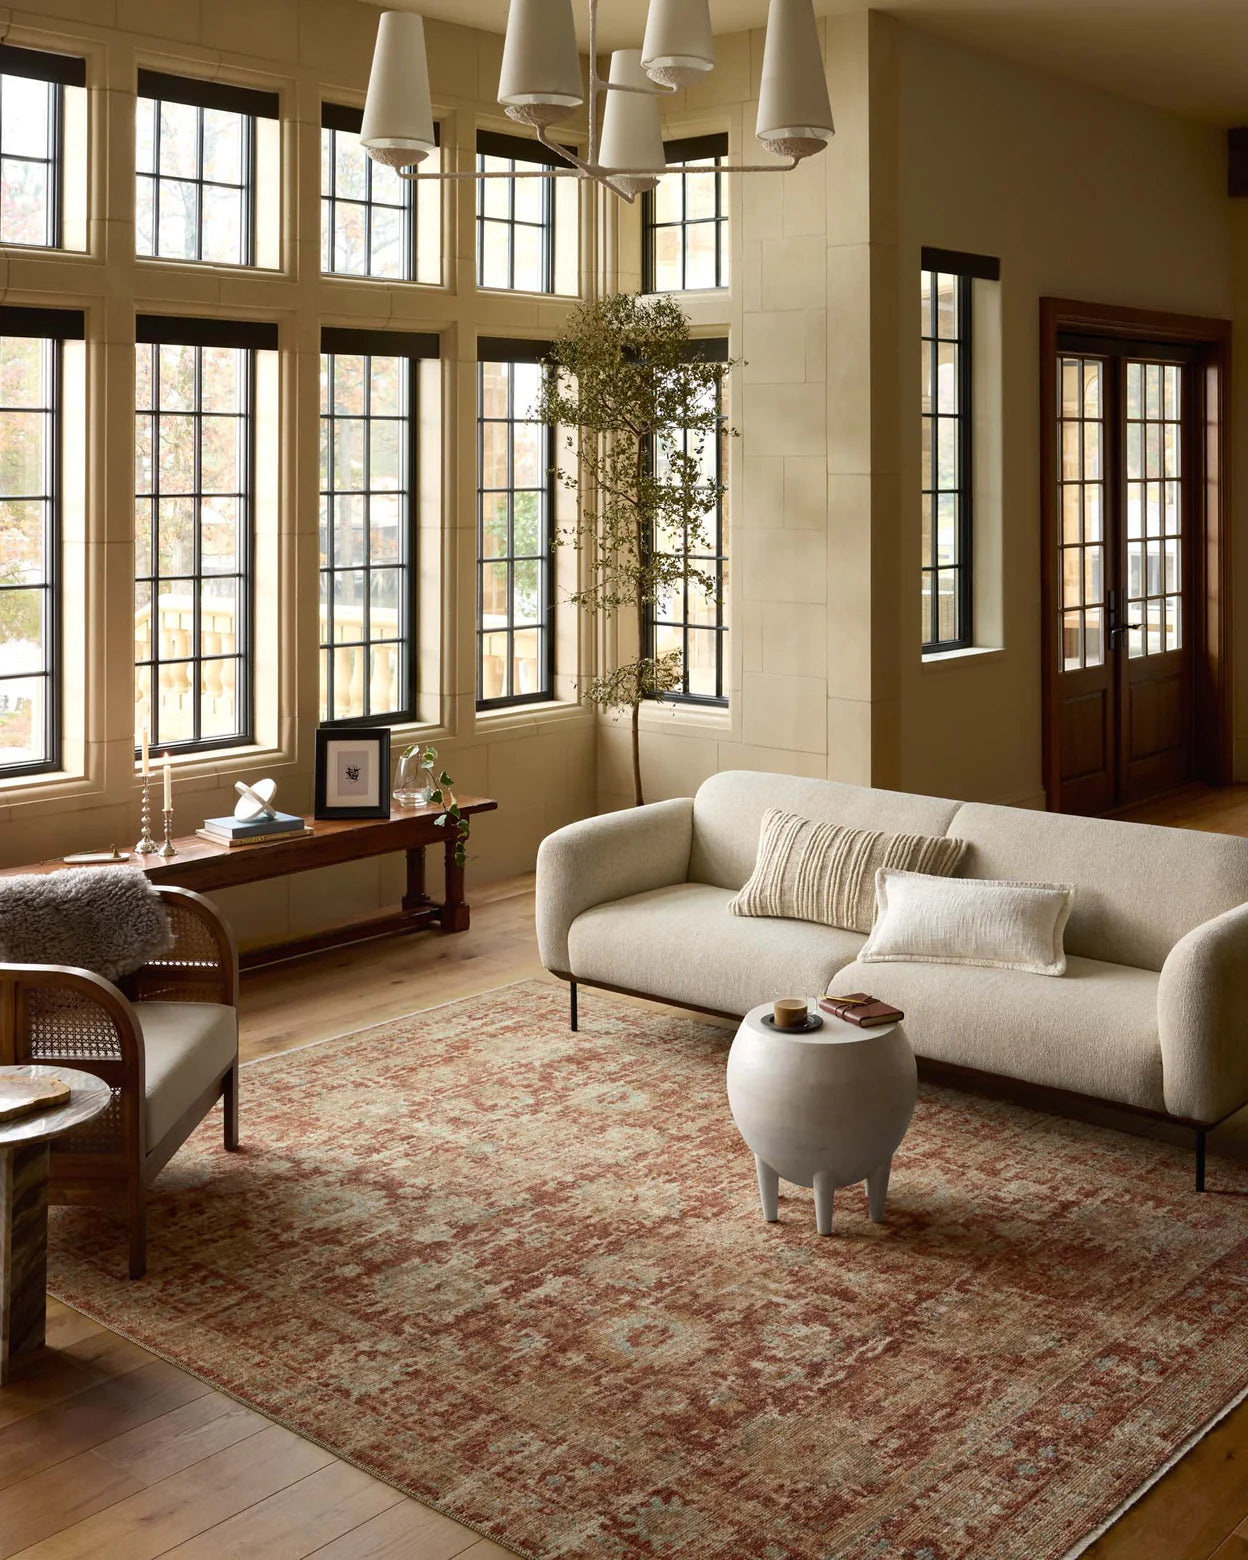 Elegant bungalow living room featuring large windows, a beige sofa, a unique round coffee table, and a Loloi Rugs Brick / Multi Rug, accented by calm, natural lighting and neutral walls in Scottsdale Arizona.